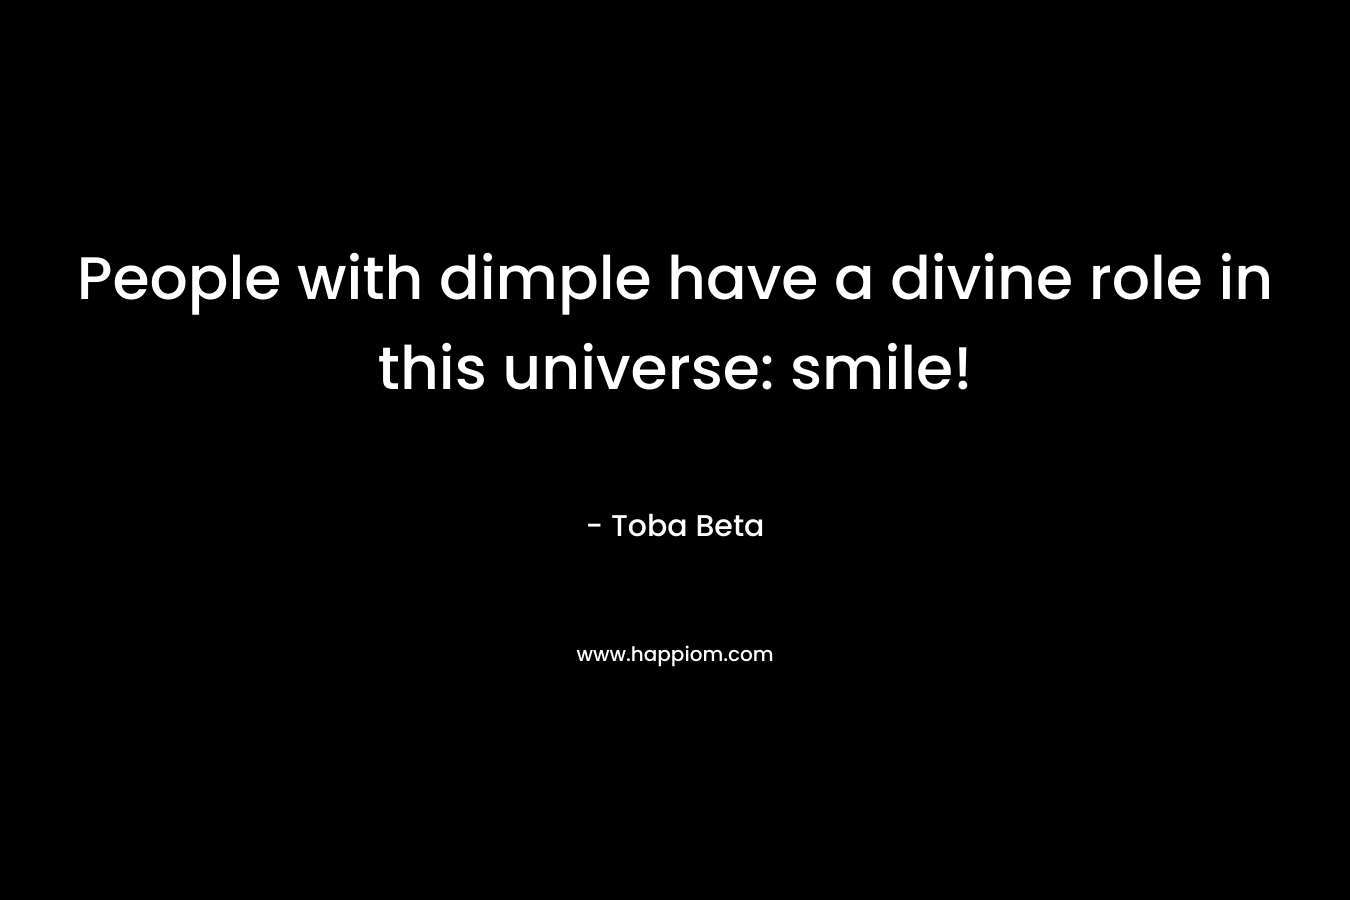 People with dimple have a divine role in this universe: smile!